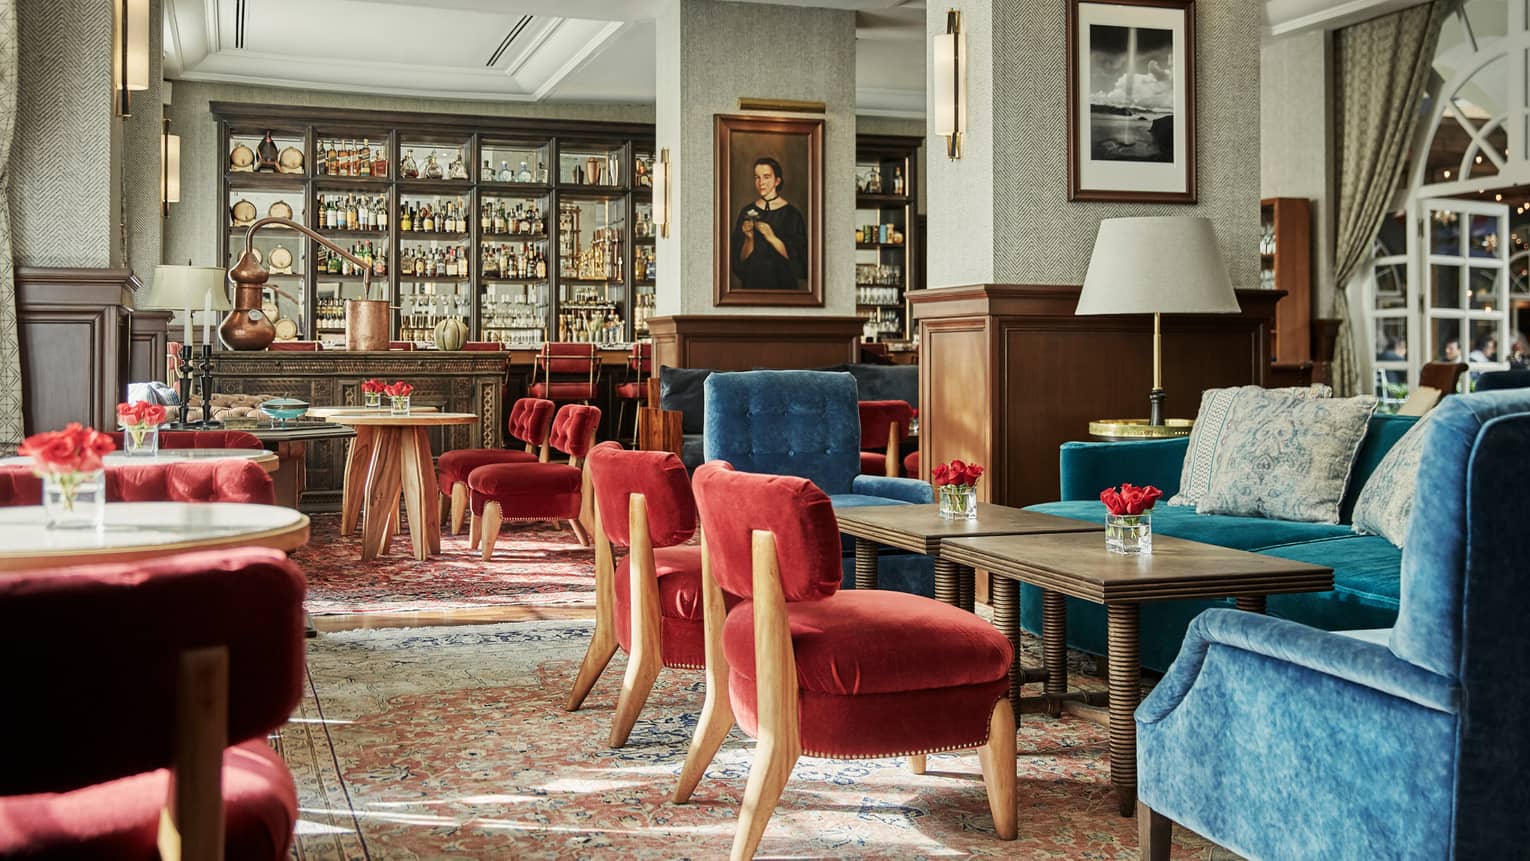 Fifty Mils dining room with red and blue velvet chairs, tables, antique-style bar, framed oil portrait